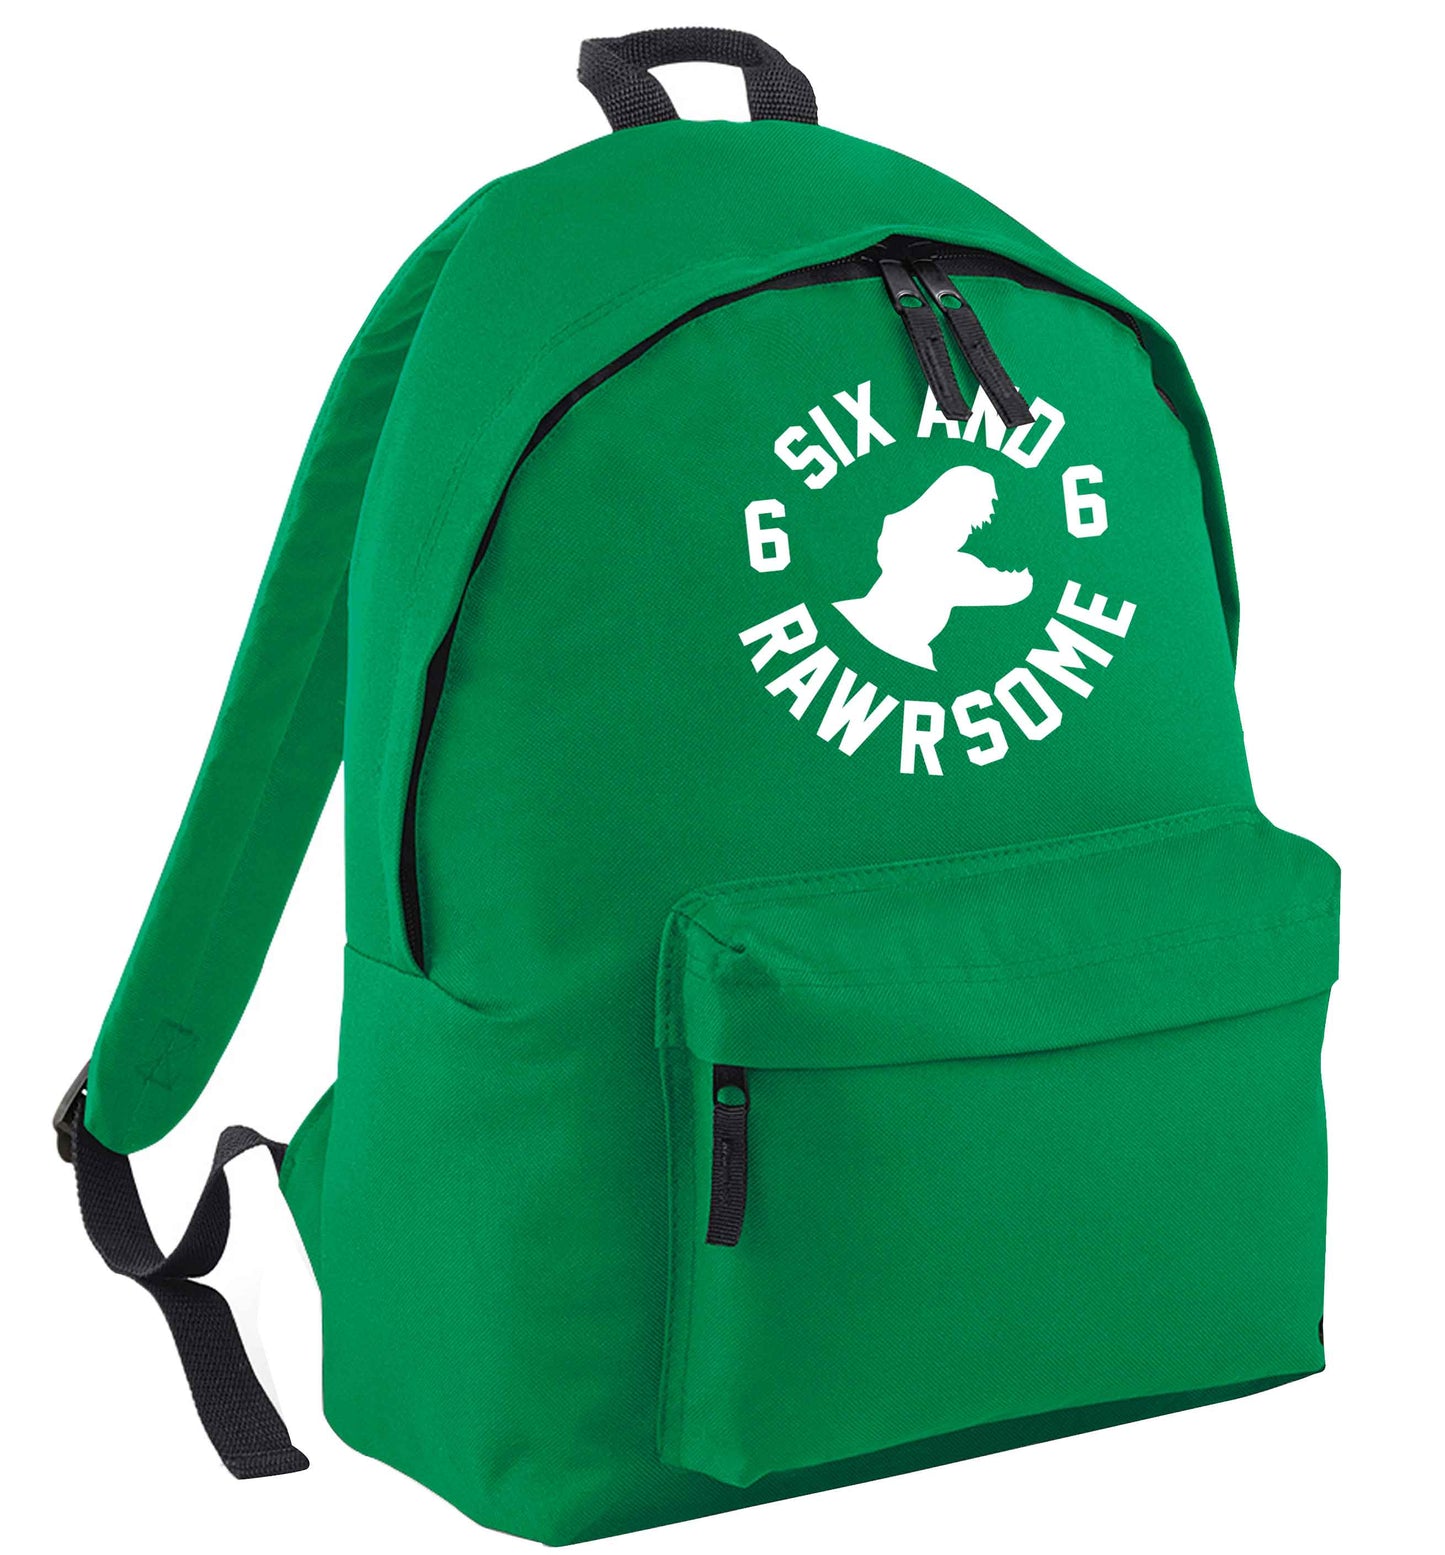 Six and rawrsome green adults backpack